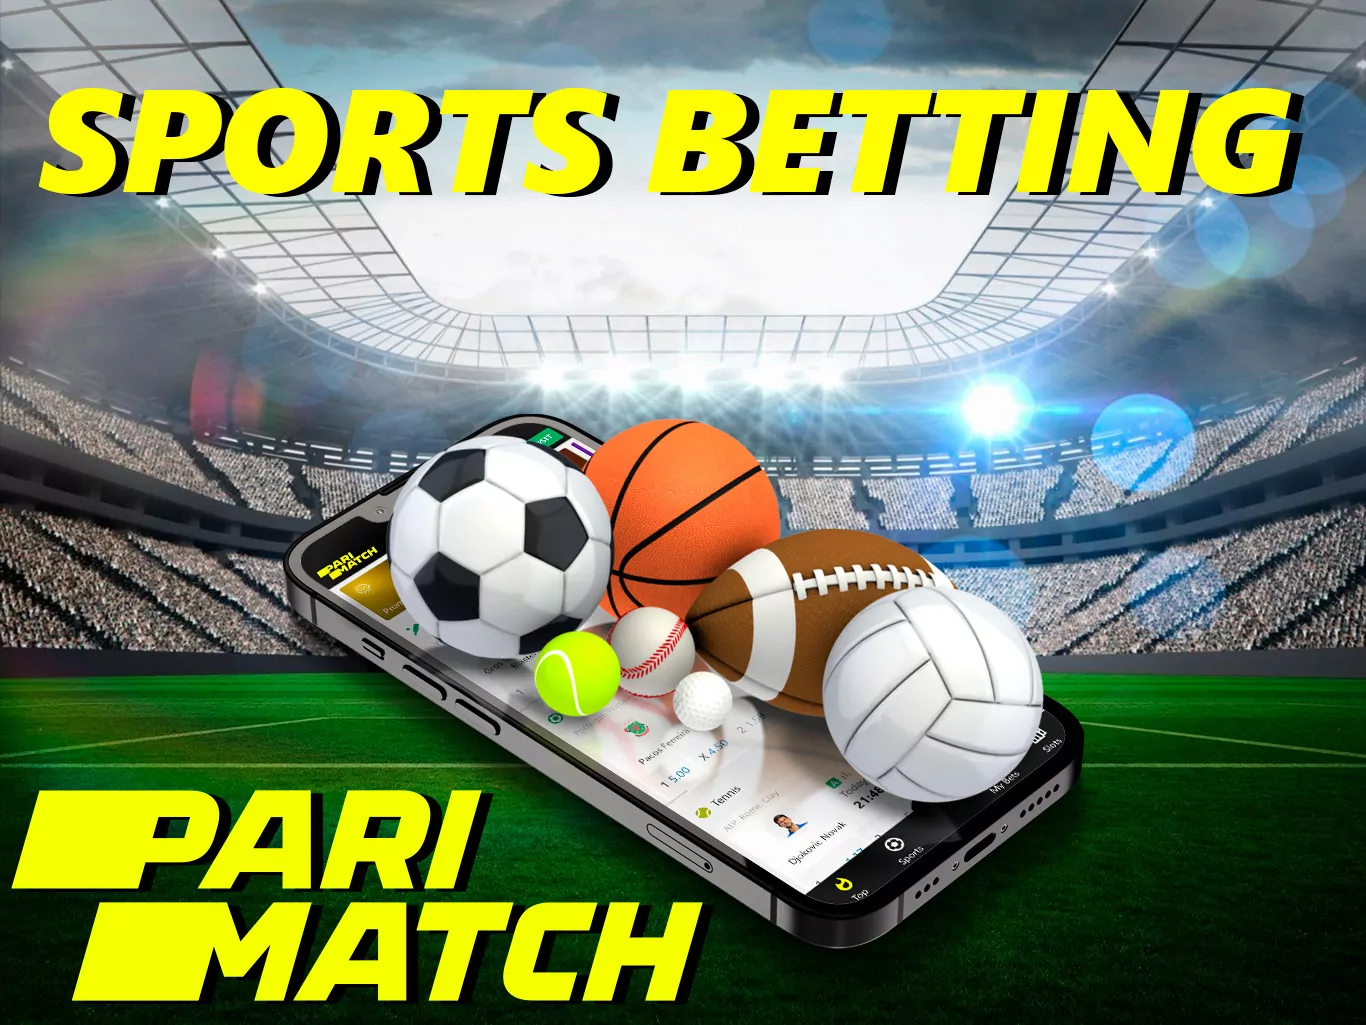 Parimatch have a sports betting section with the most popular sports.